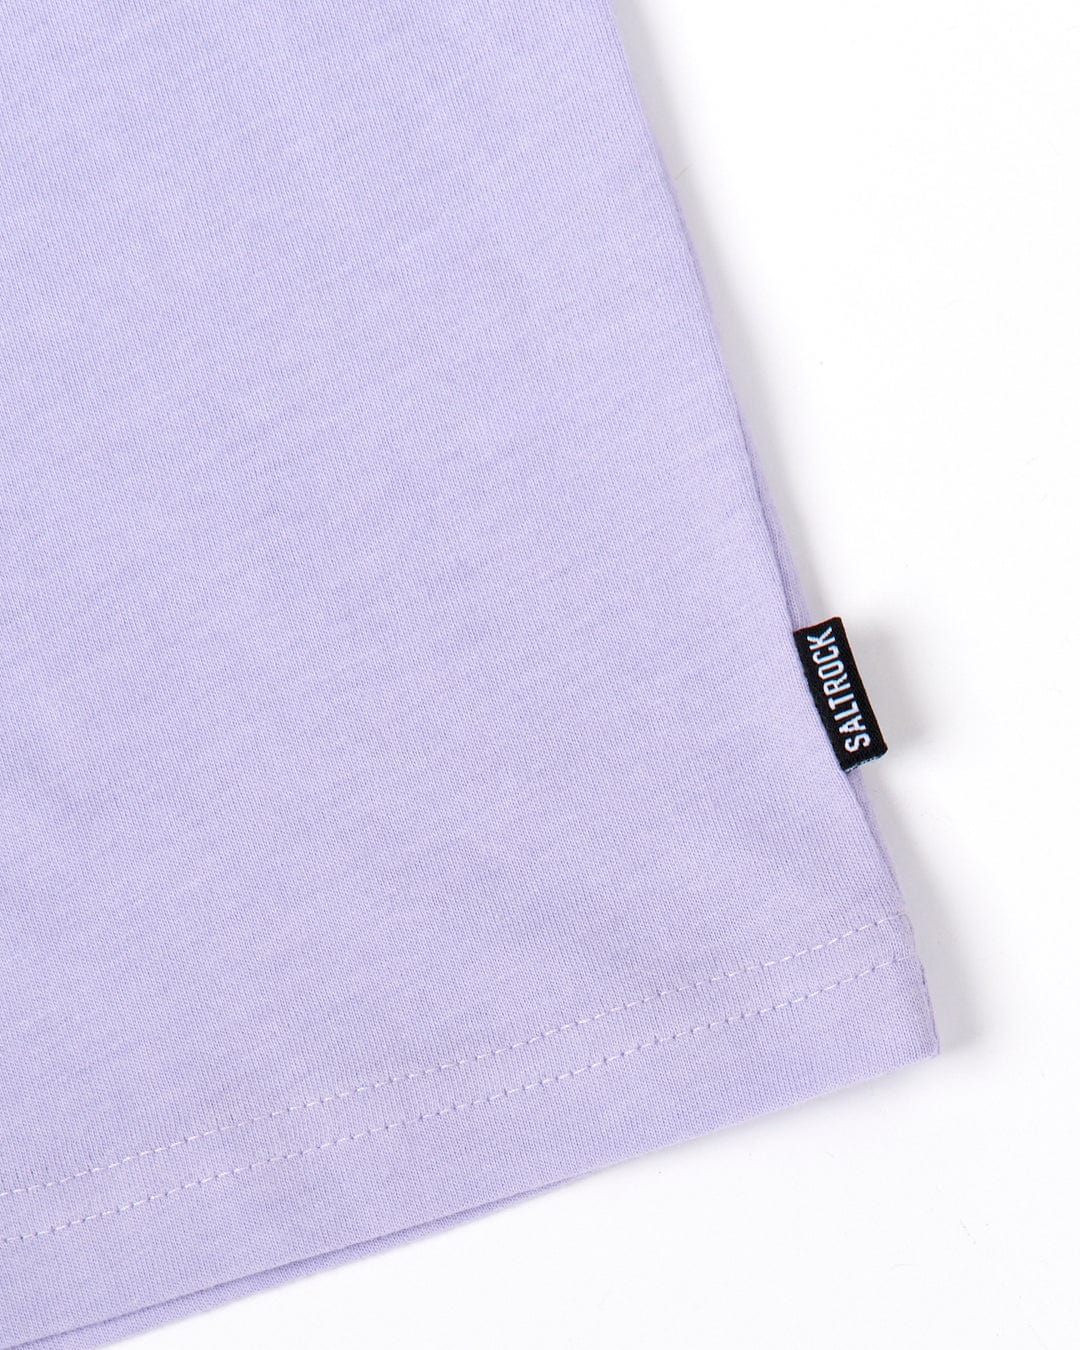 Close-up of a Saltrock Original - Mens Short Sleeve T-Shirt in lilac-colored, lightweight material fabric with a visible seam and a black Saltrock brand label.